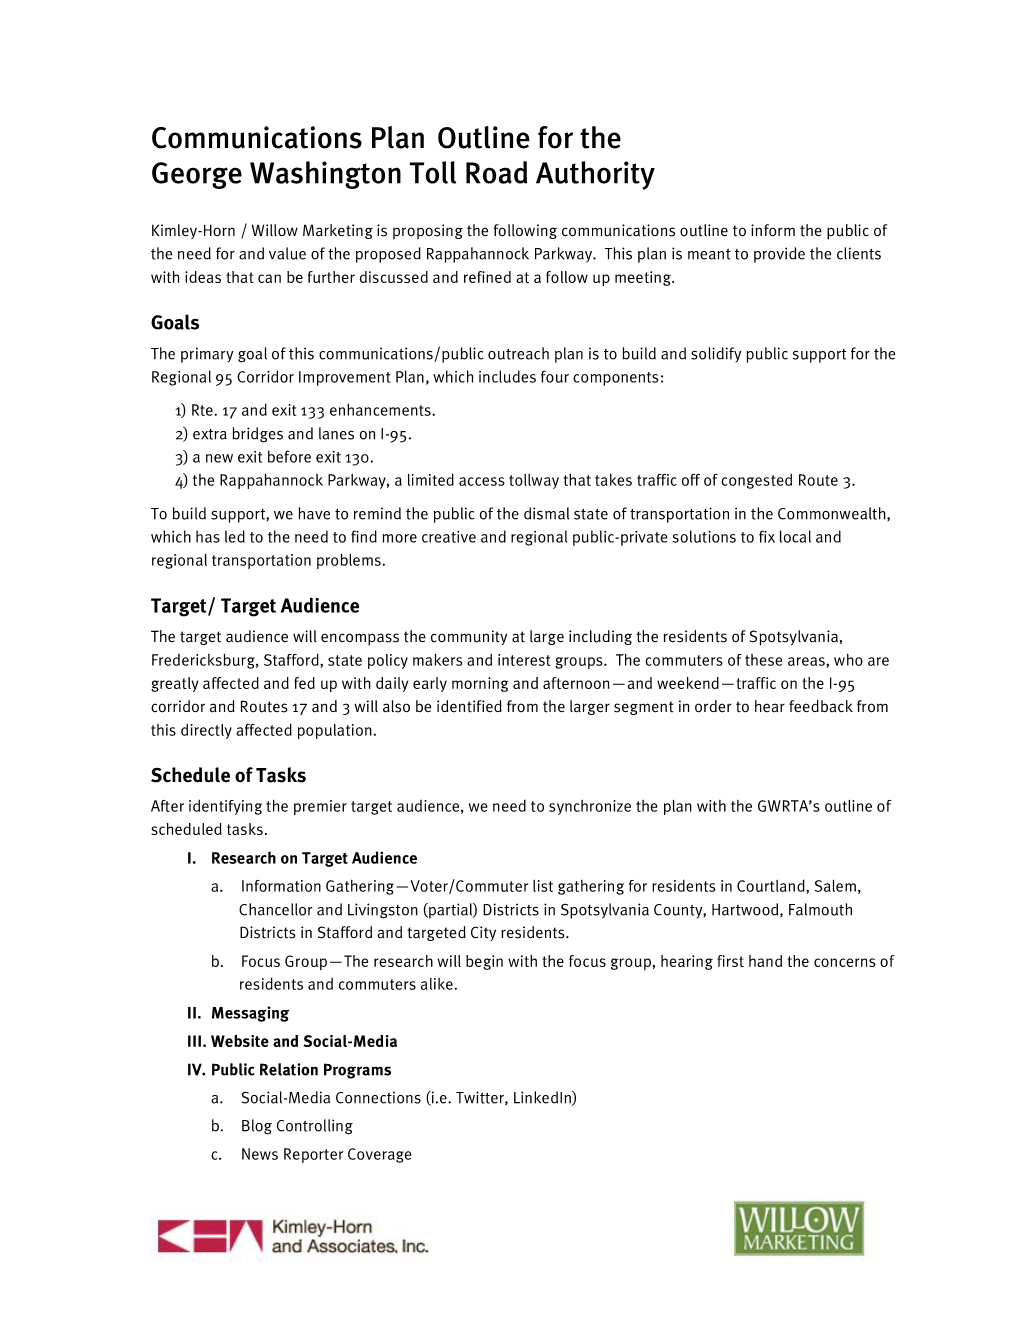 Communications Plan Outline for the George Washington Toll Road Authority